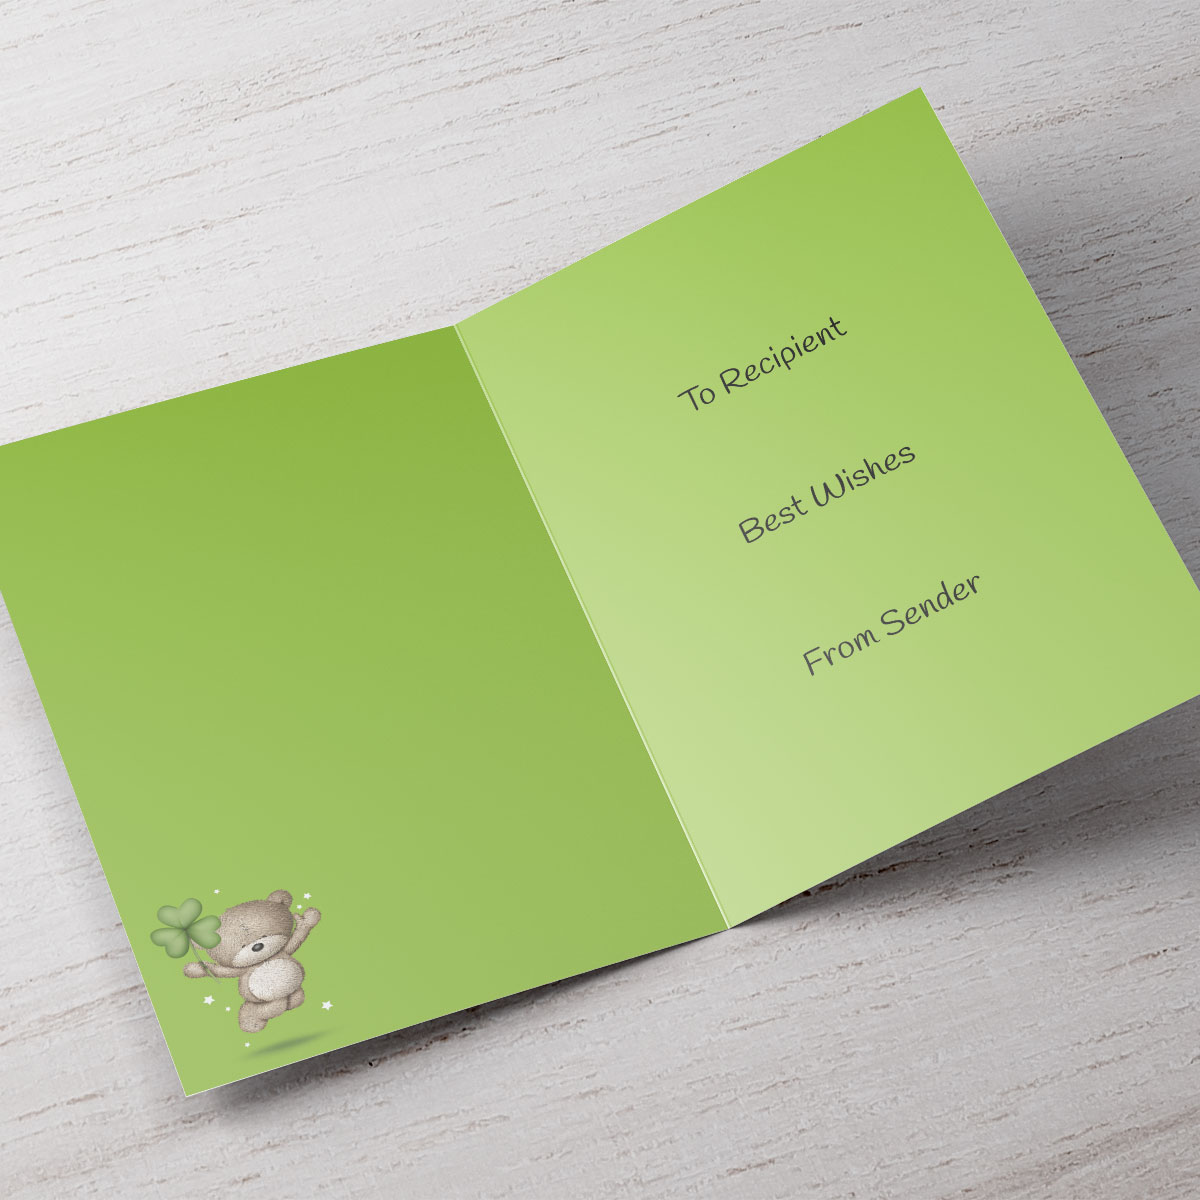 Hugs Personalised St Patrick's Day Card - Three Leaf Clover